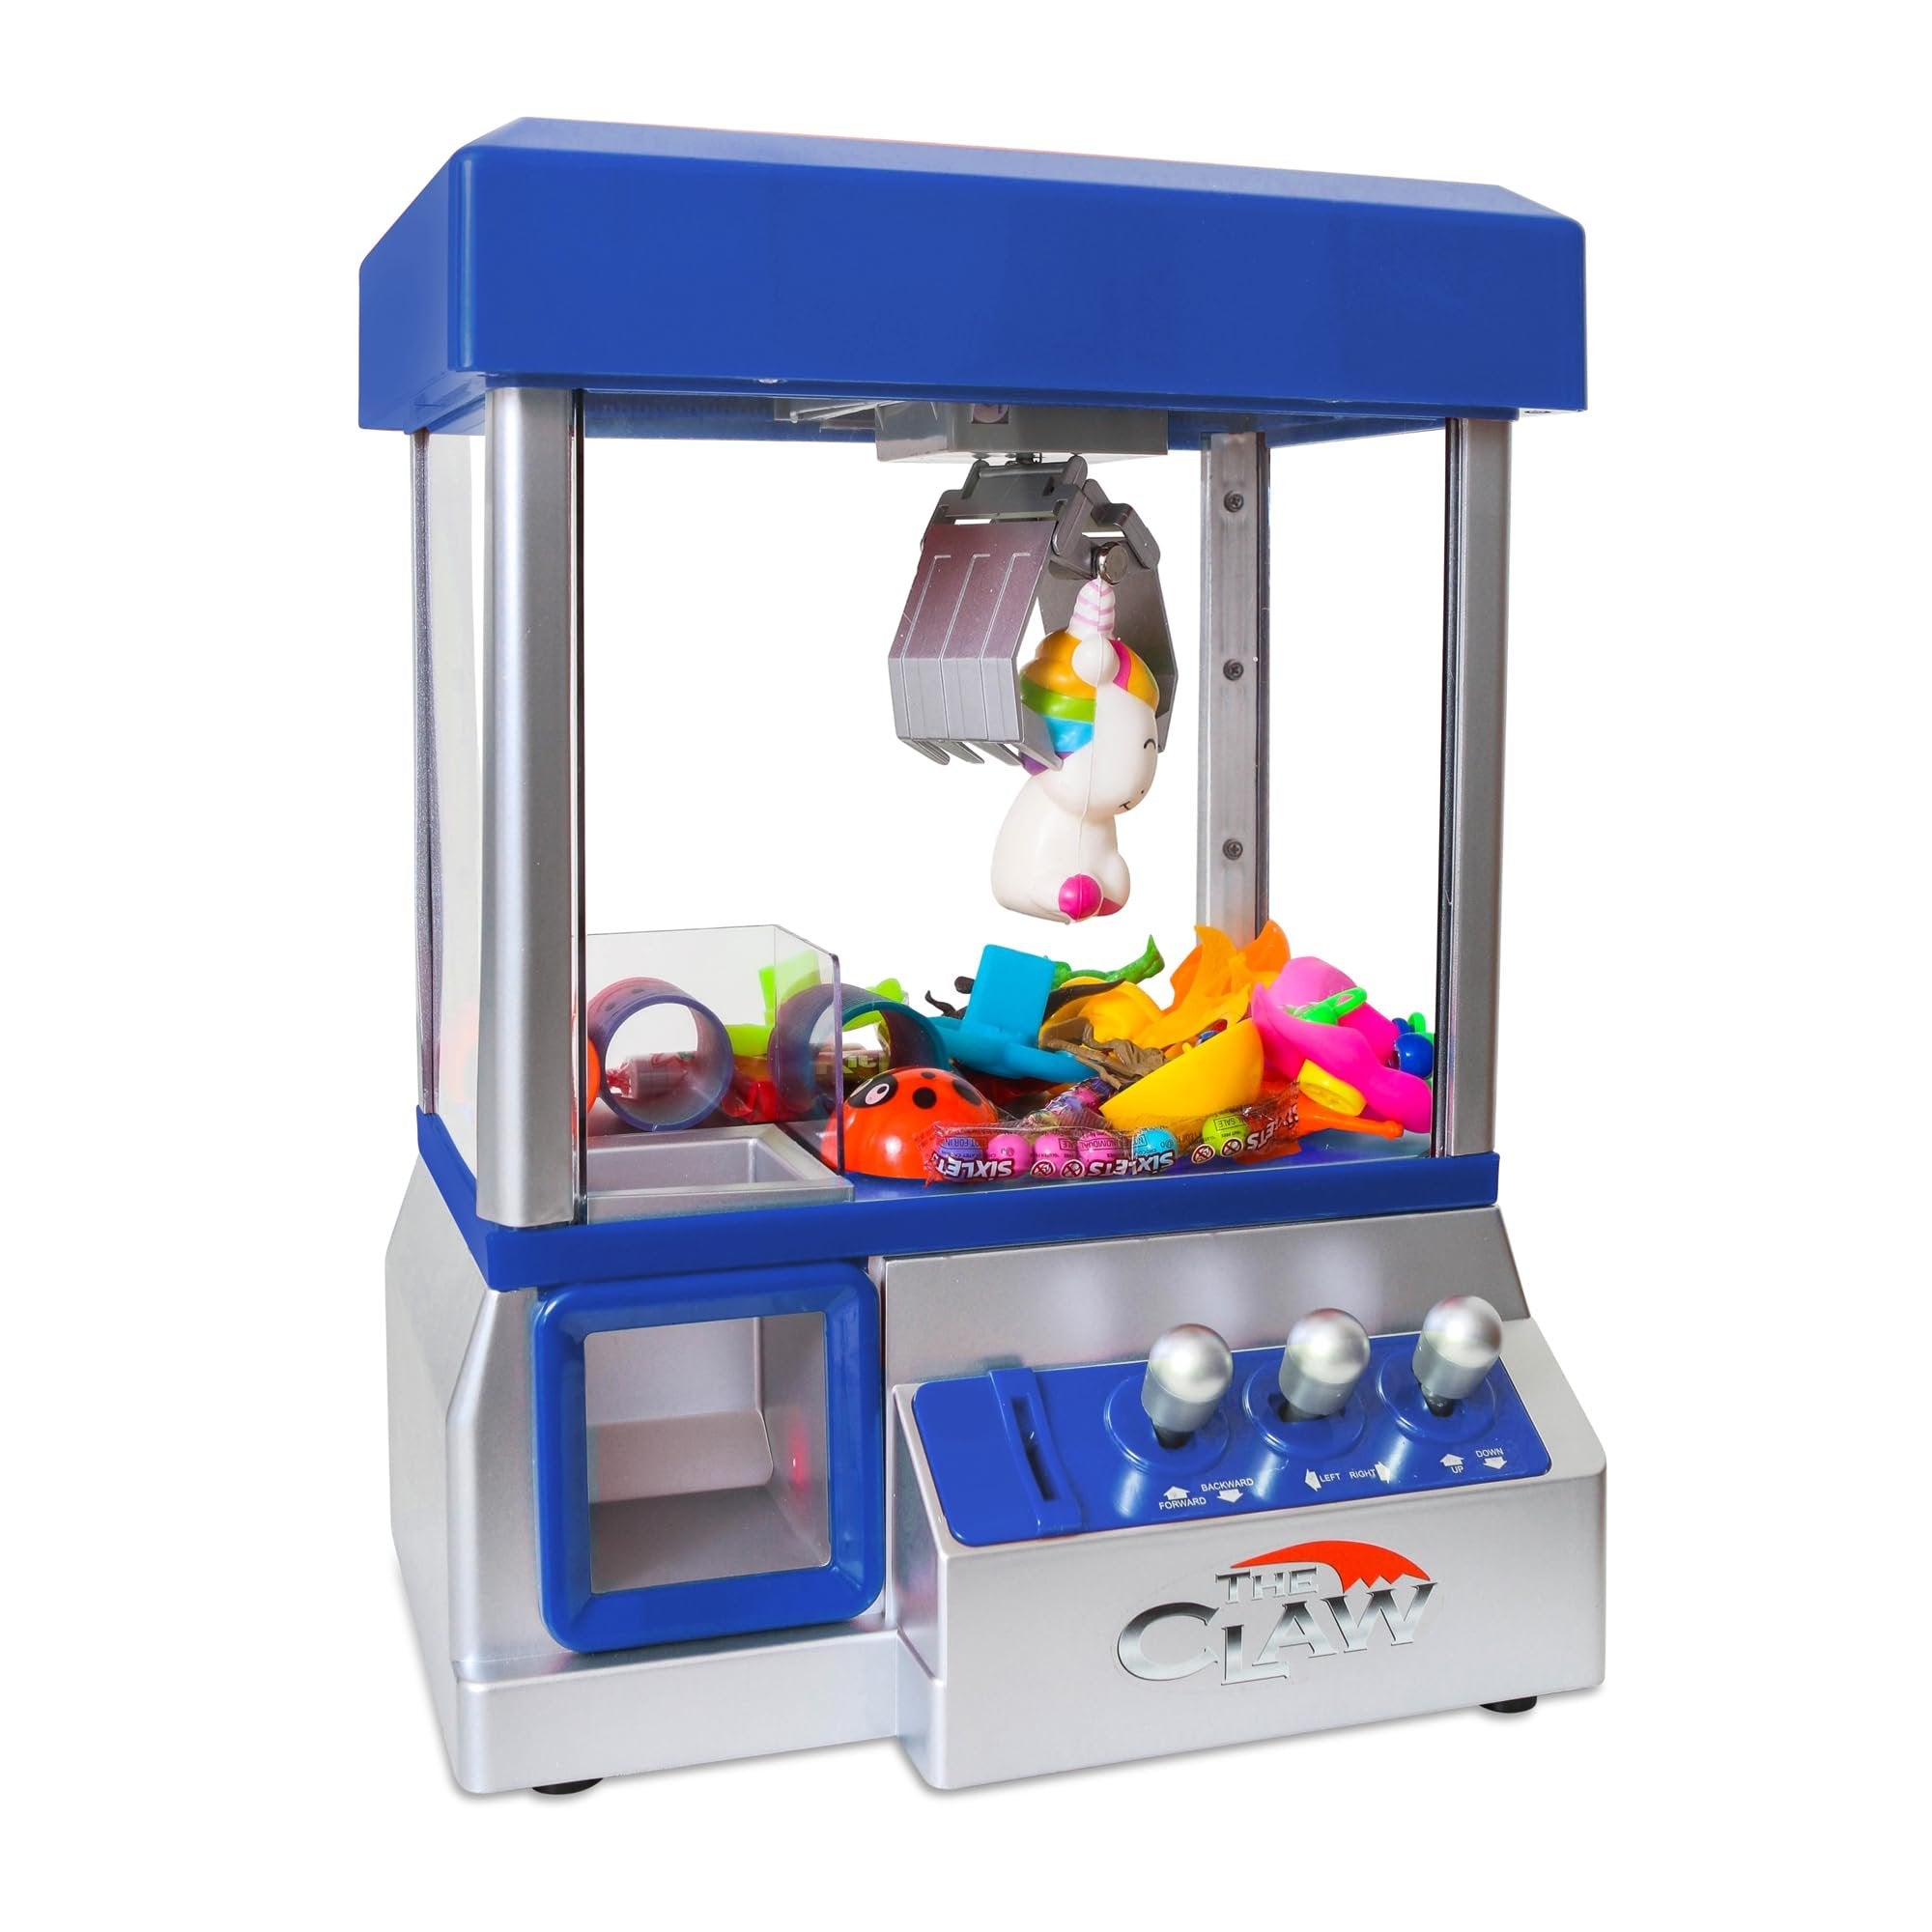 Bundaloo Claw Machine Arcade Game with Sound, Cool Fun Mini Candy Grabber Prize Dispenser Vending Toy for Kids, Boys & Girls (The Santa Claw)